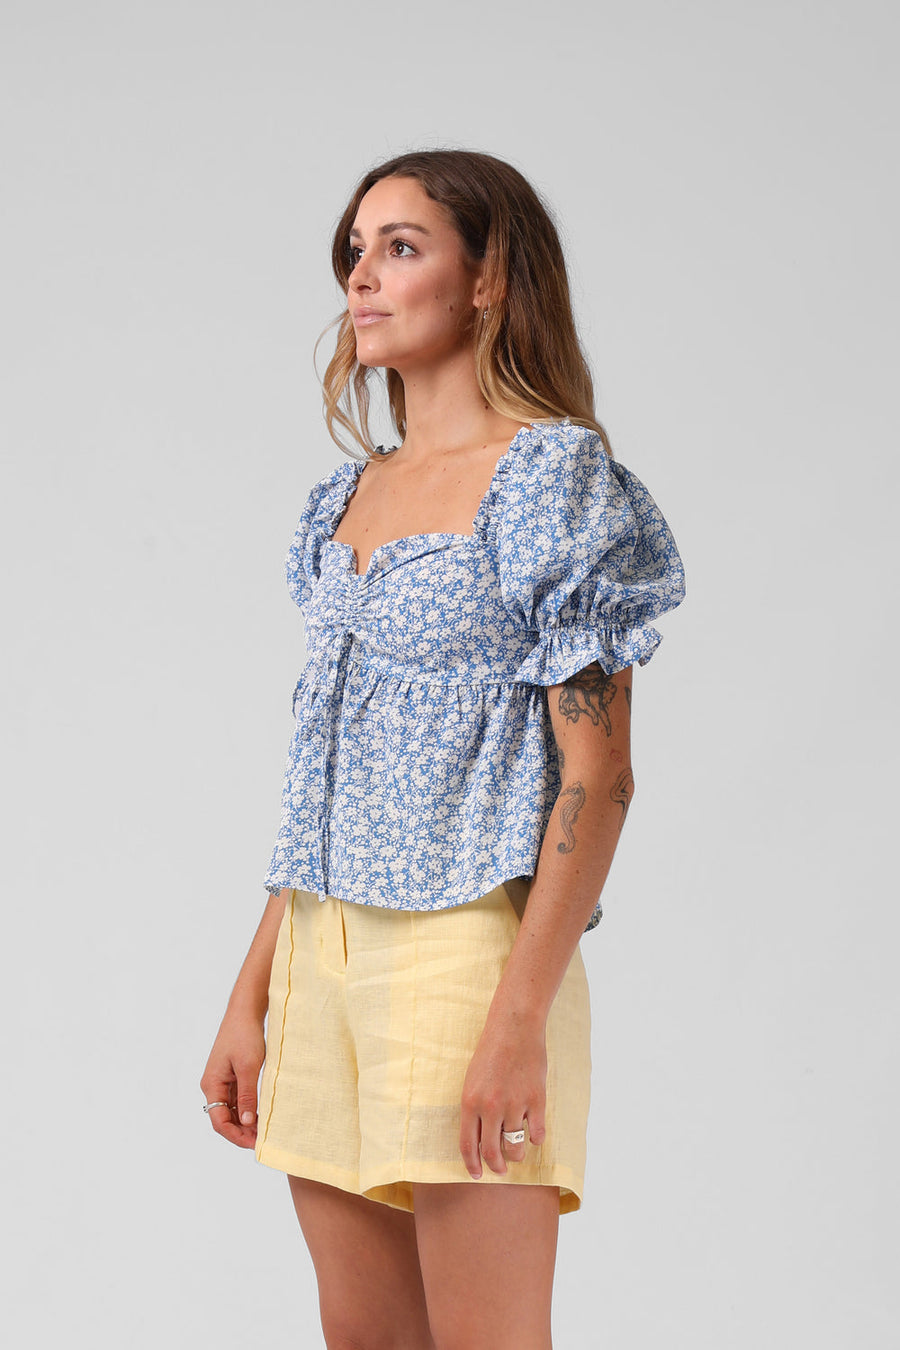 RPM DAISY TOP - BLUE FLORAL - WILD ROSE